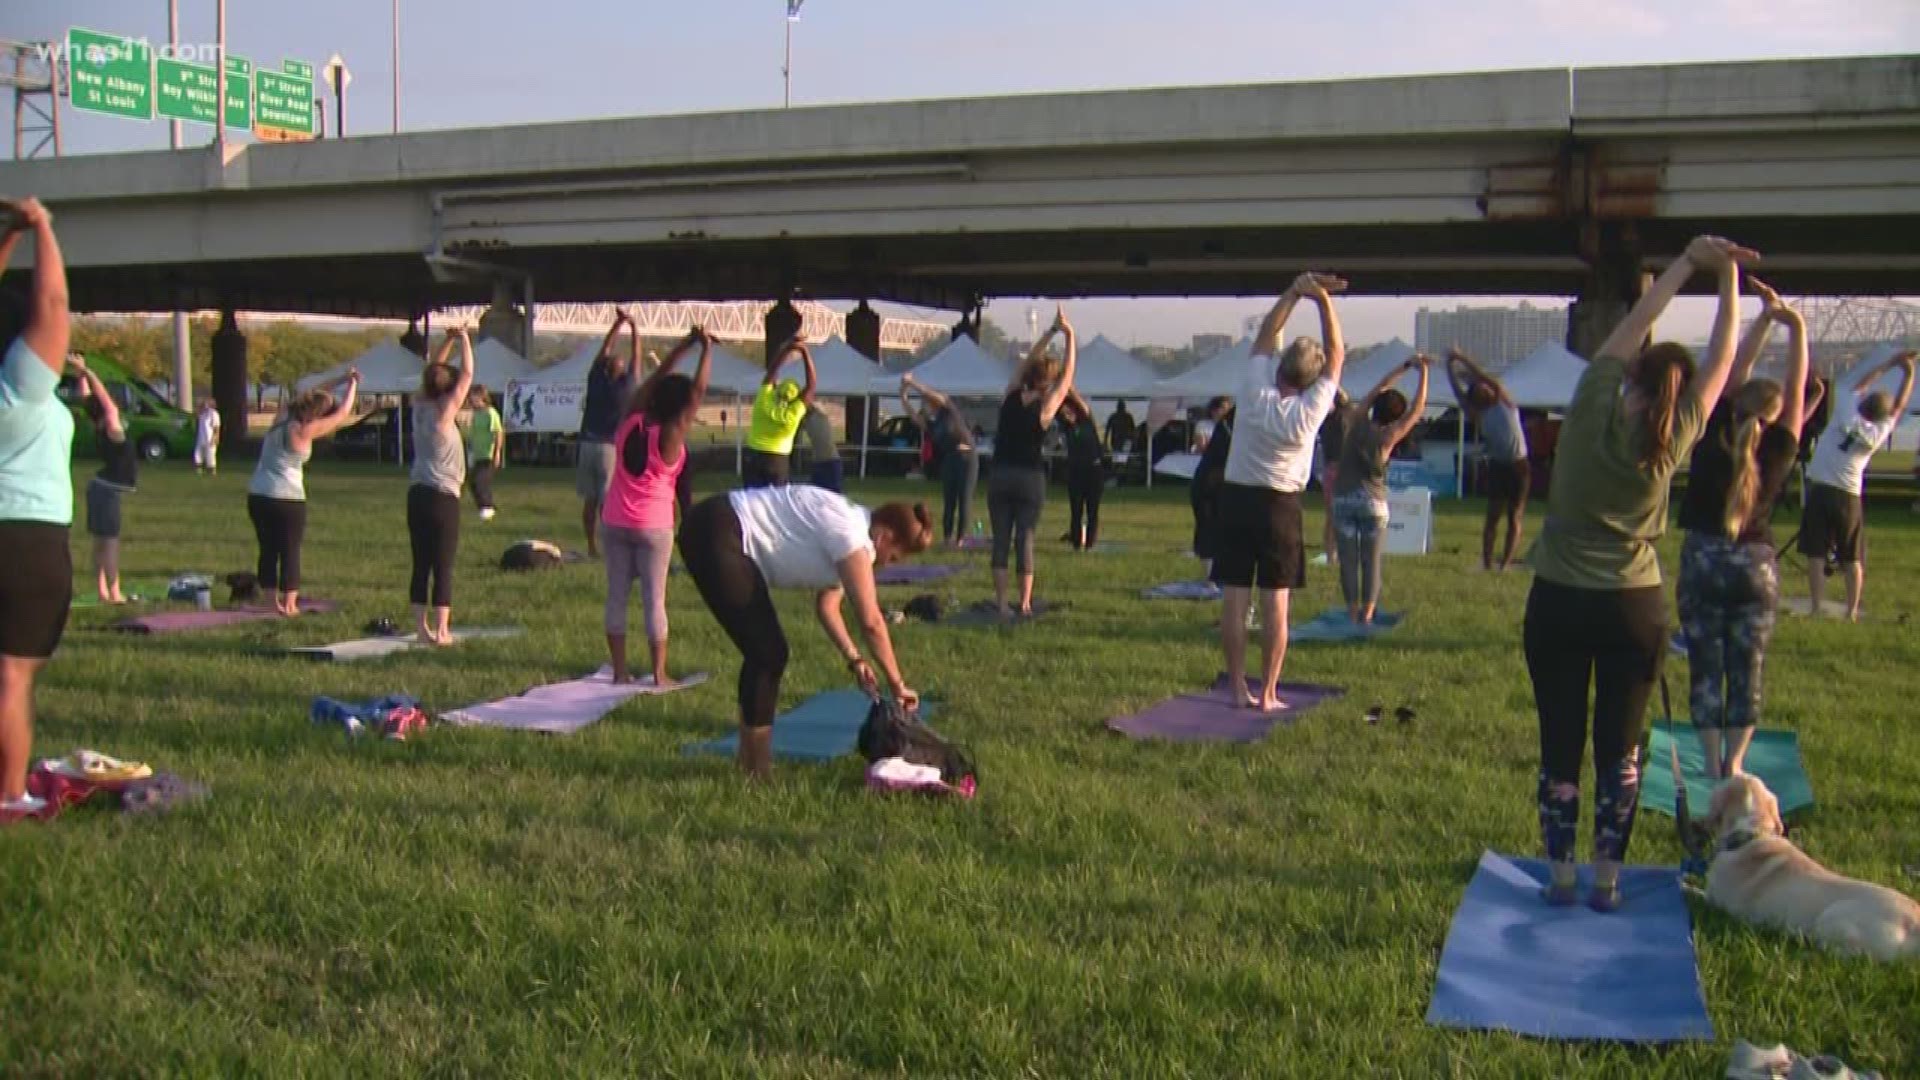 Event celebrates health and community as summer comes to an end.